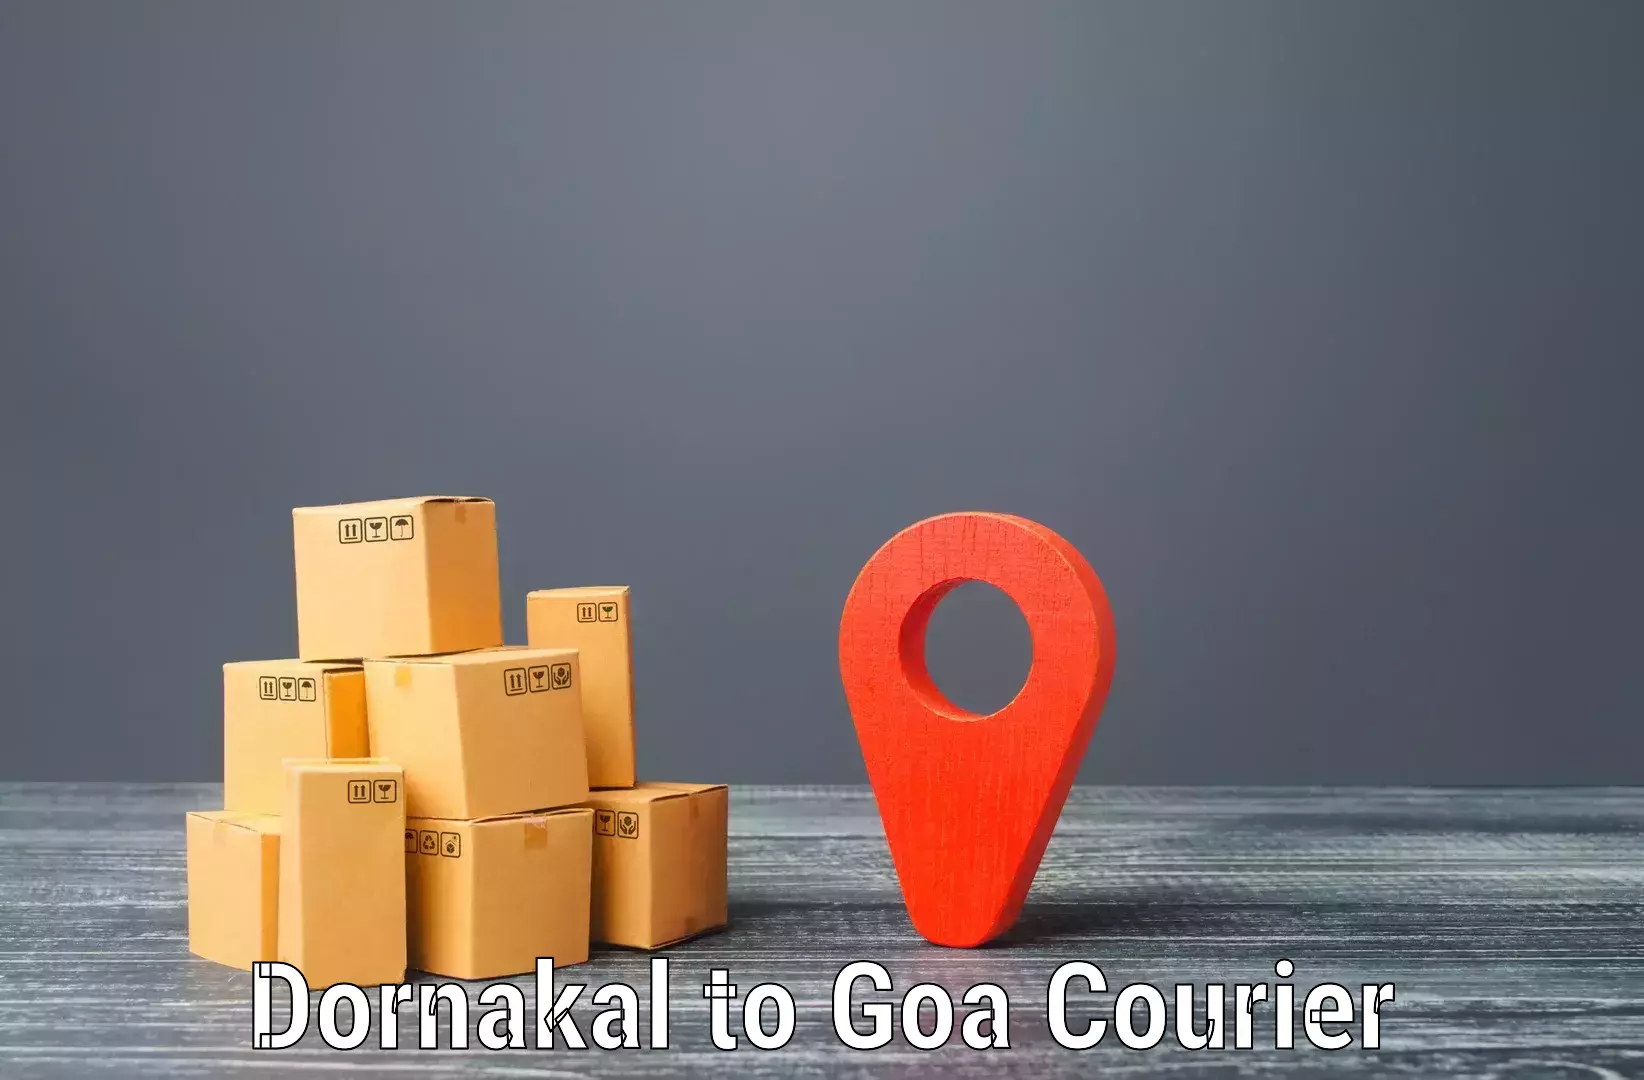 Multi-national courier services Dornakal to Goa